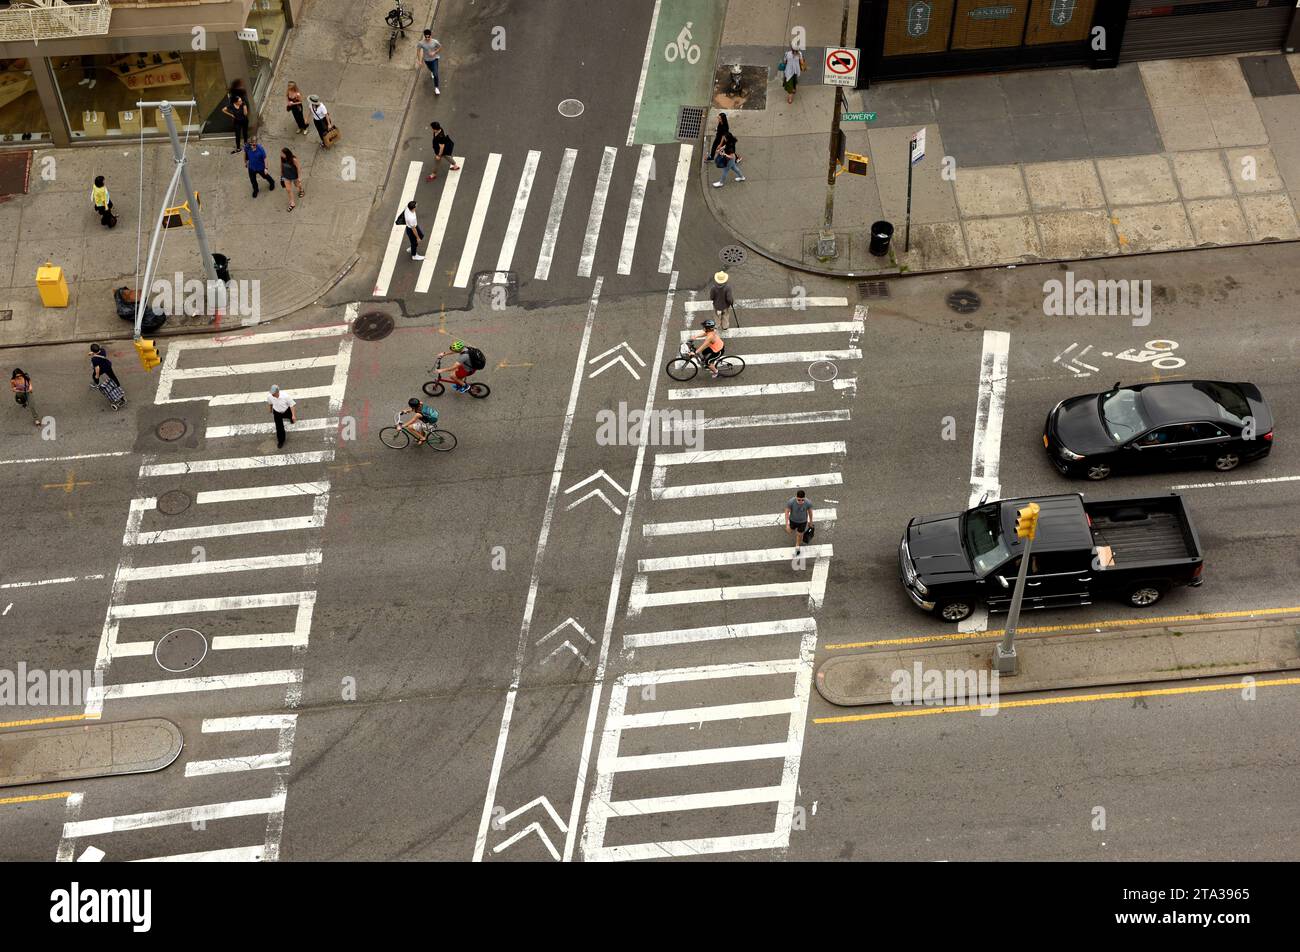 New York, USA - June 9, 2018: People walking on zebra crossings in New York. Looking down from skyscraper on the busy streets in New York. Stock Photo